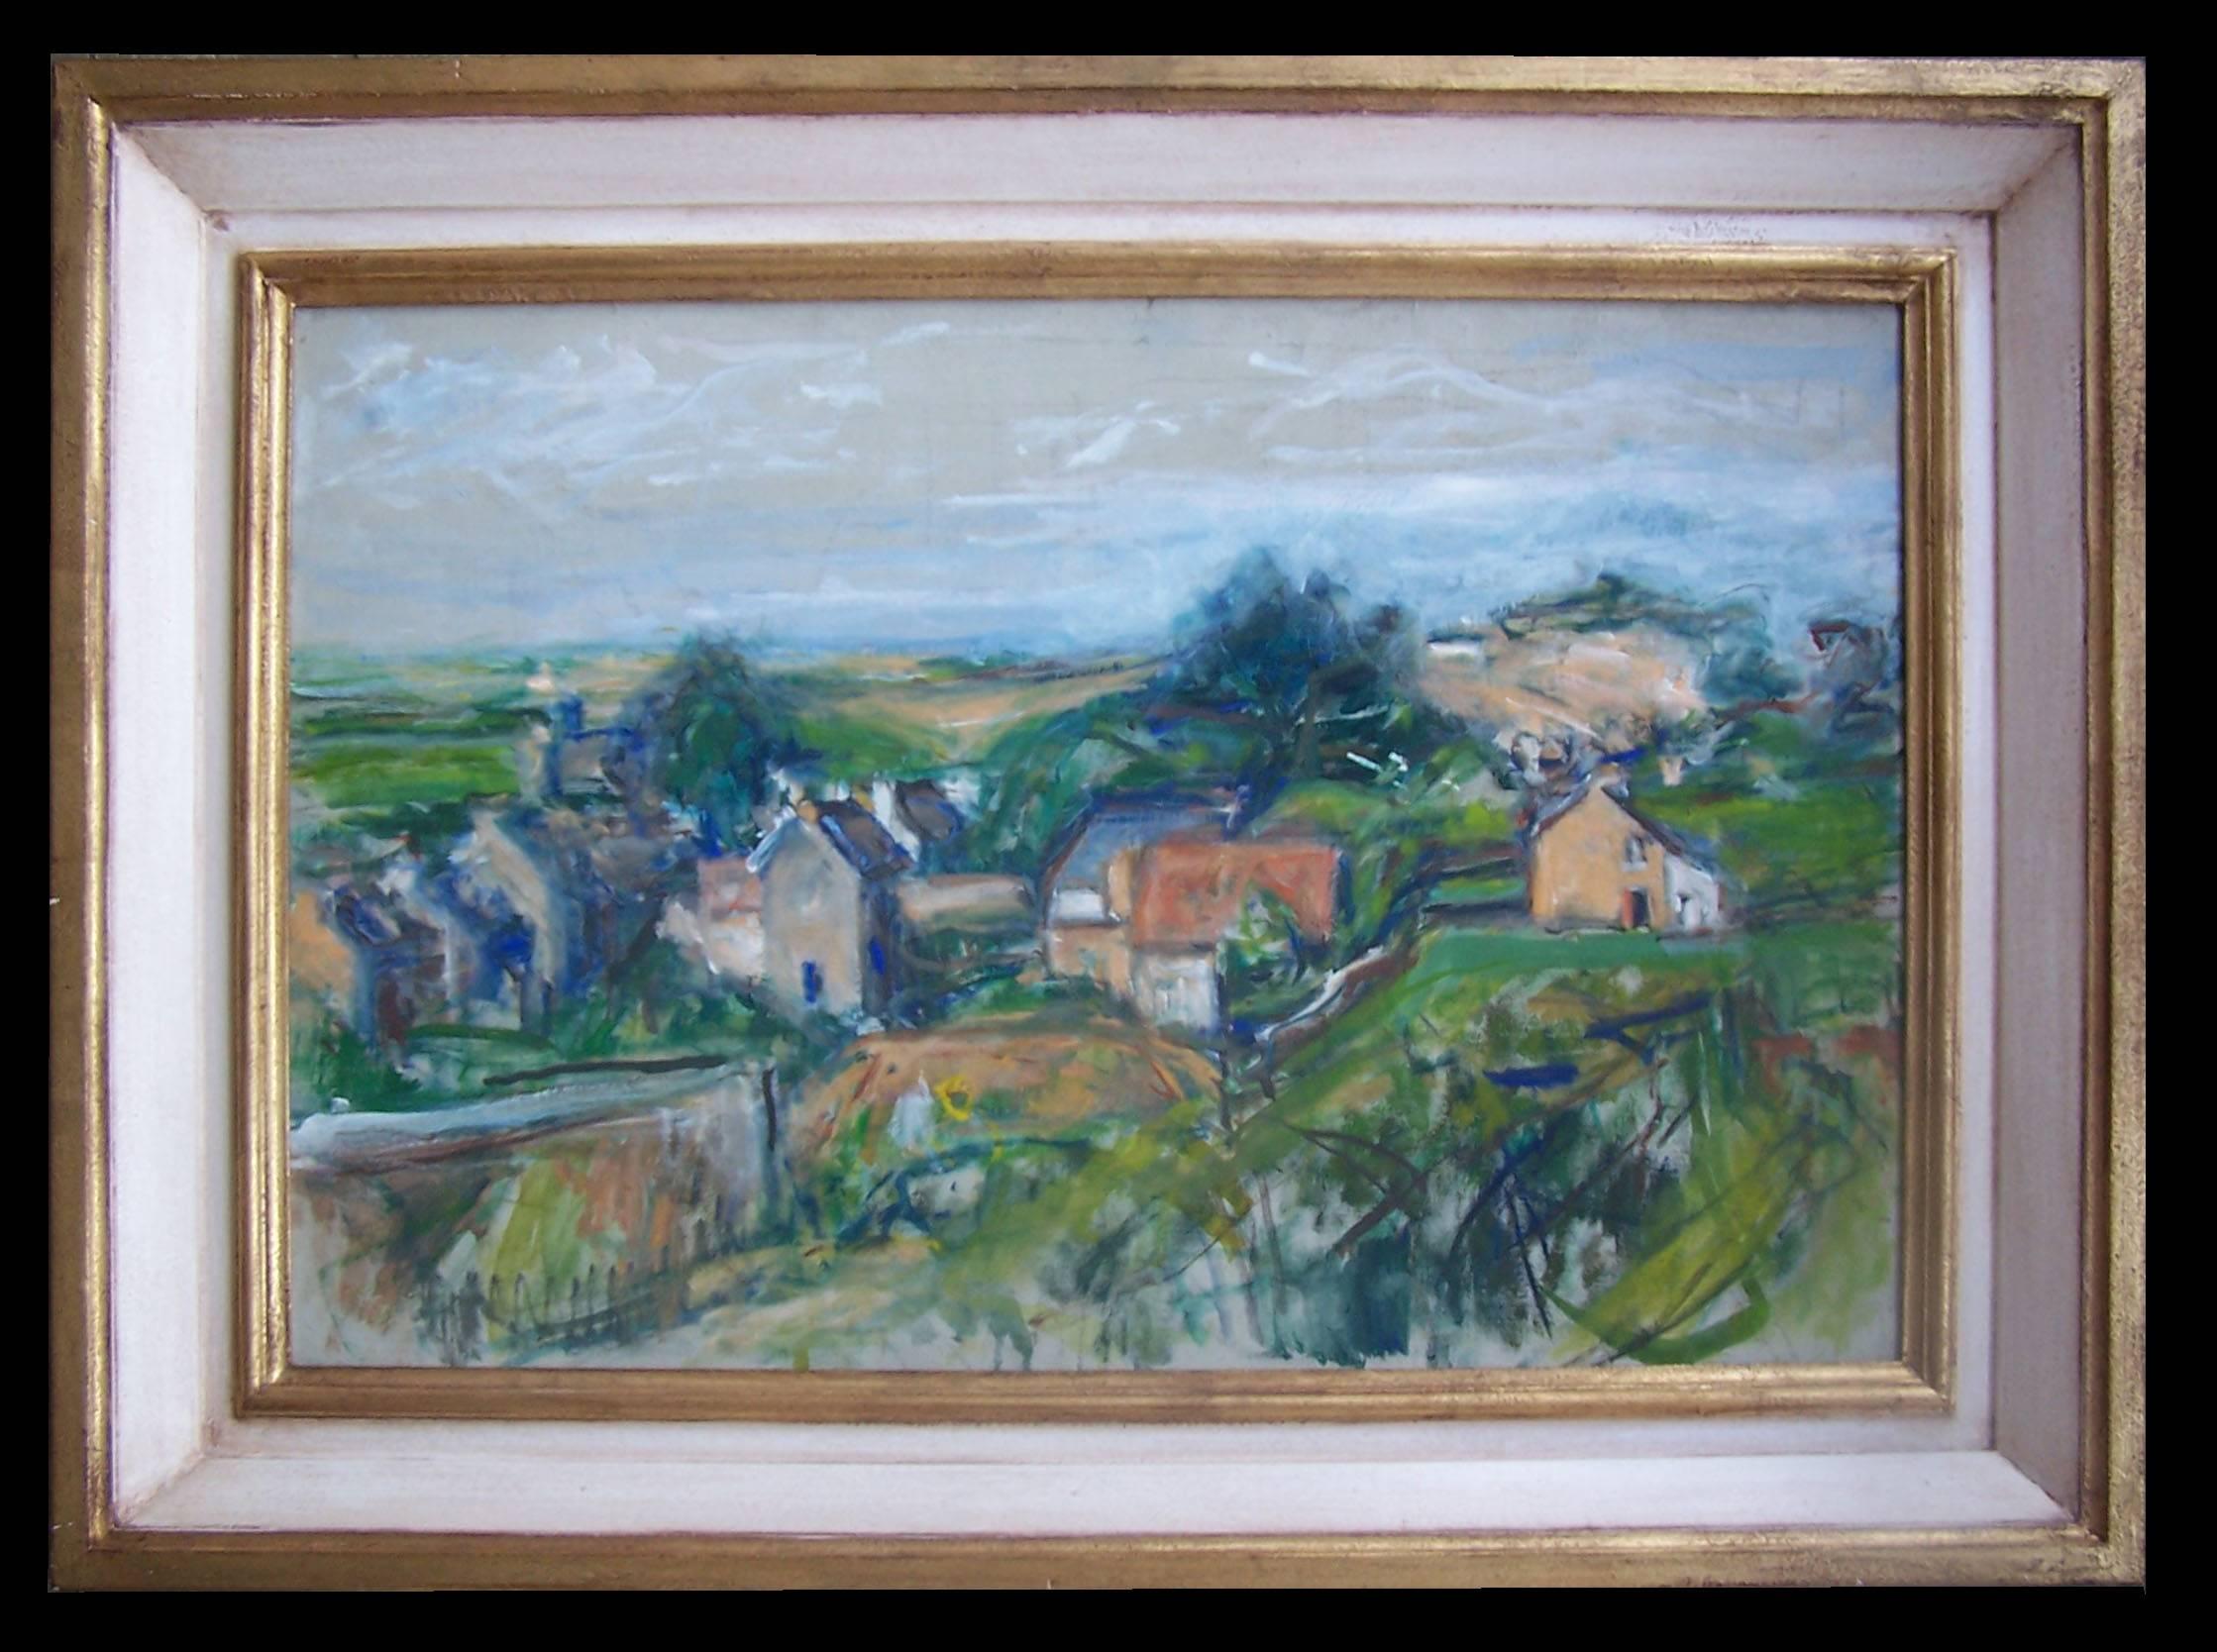 Landscape in the South of France - Painting by Béla Czóbel